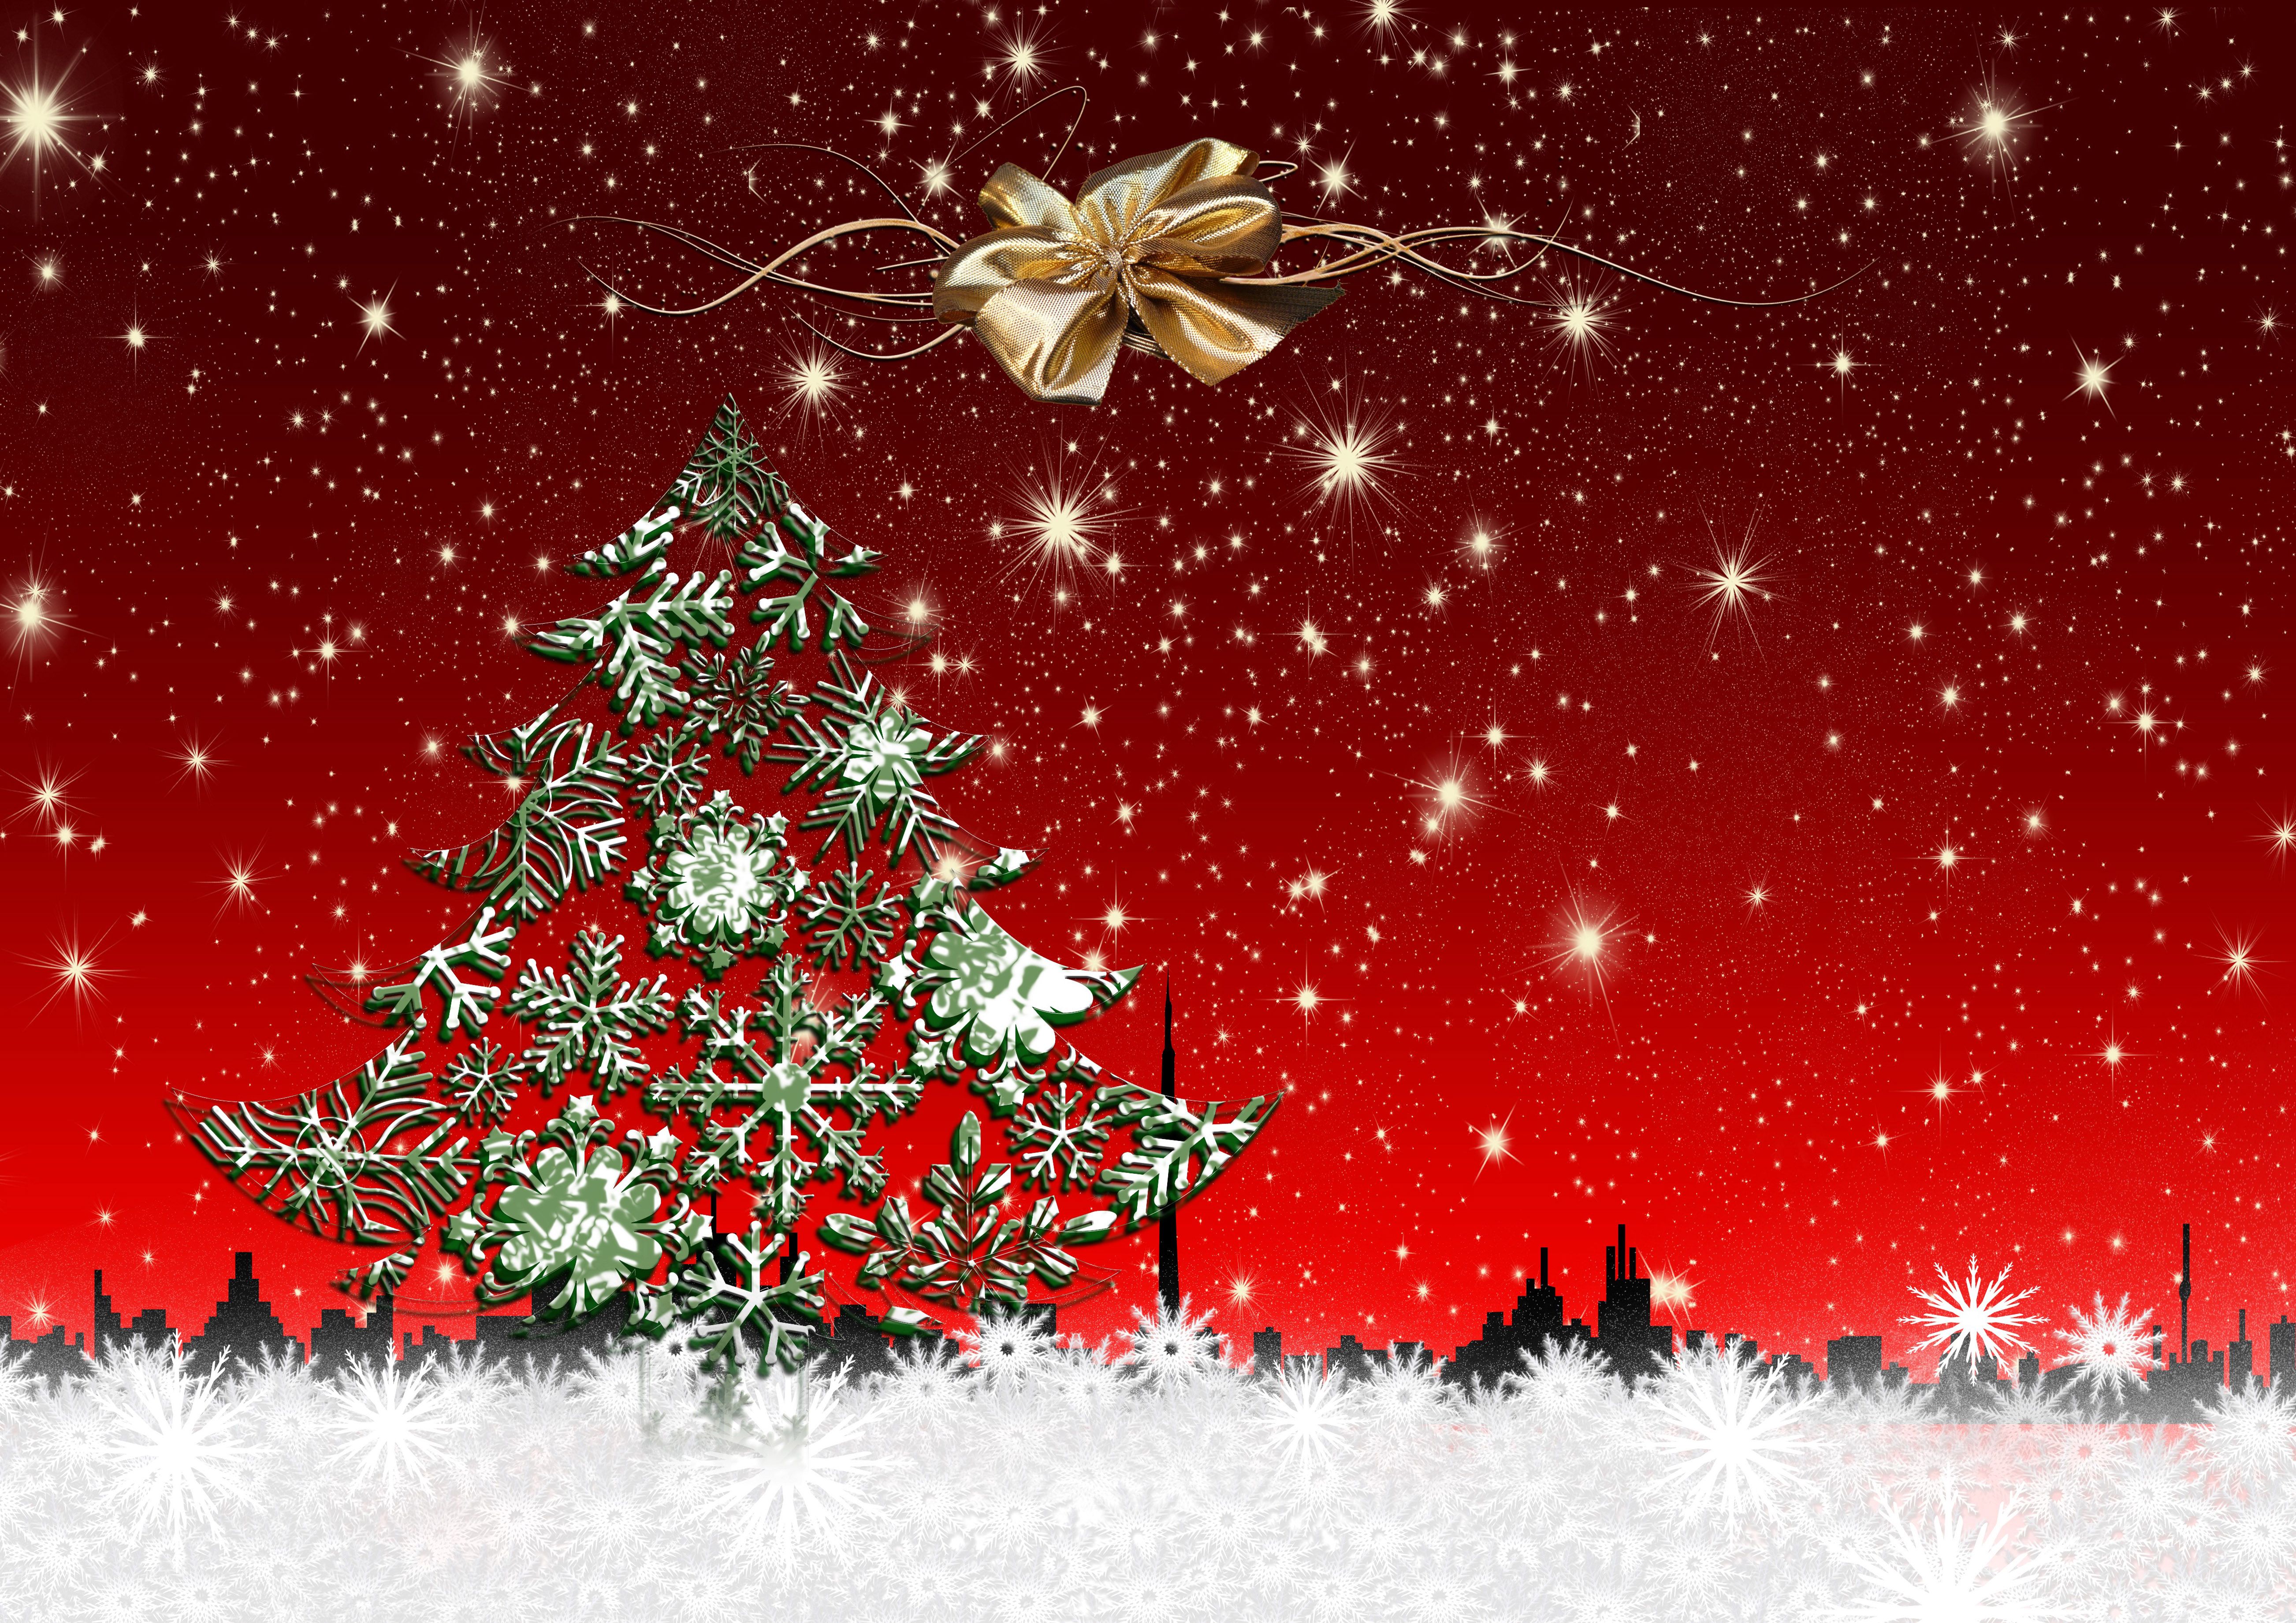 Stars at Xmas Background Image, Cards or Christmas Wallpaper